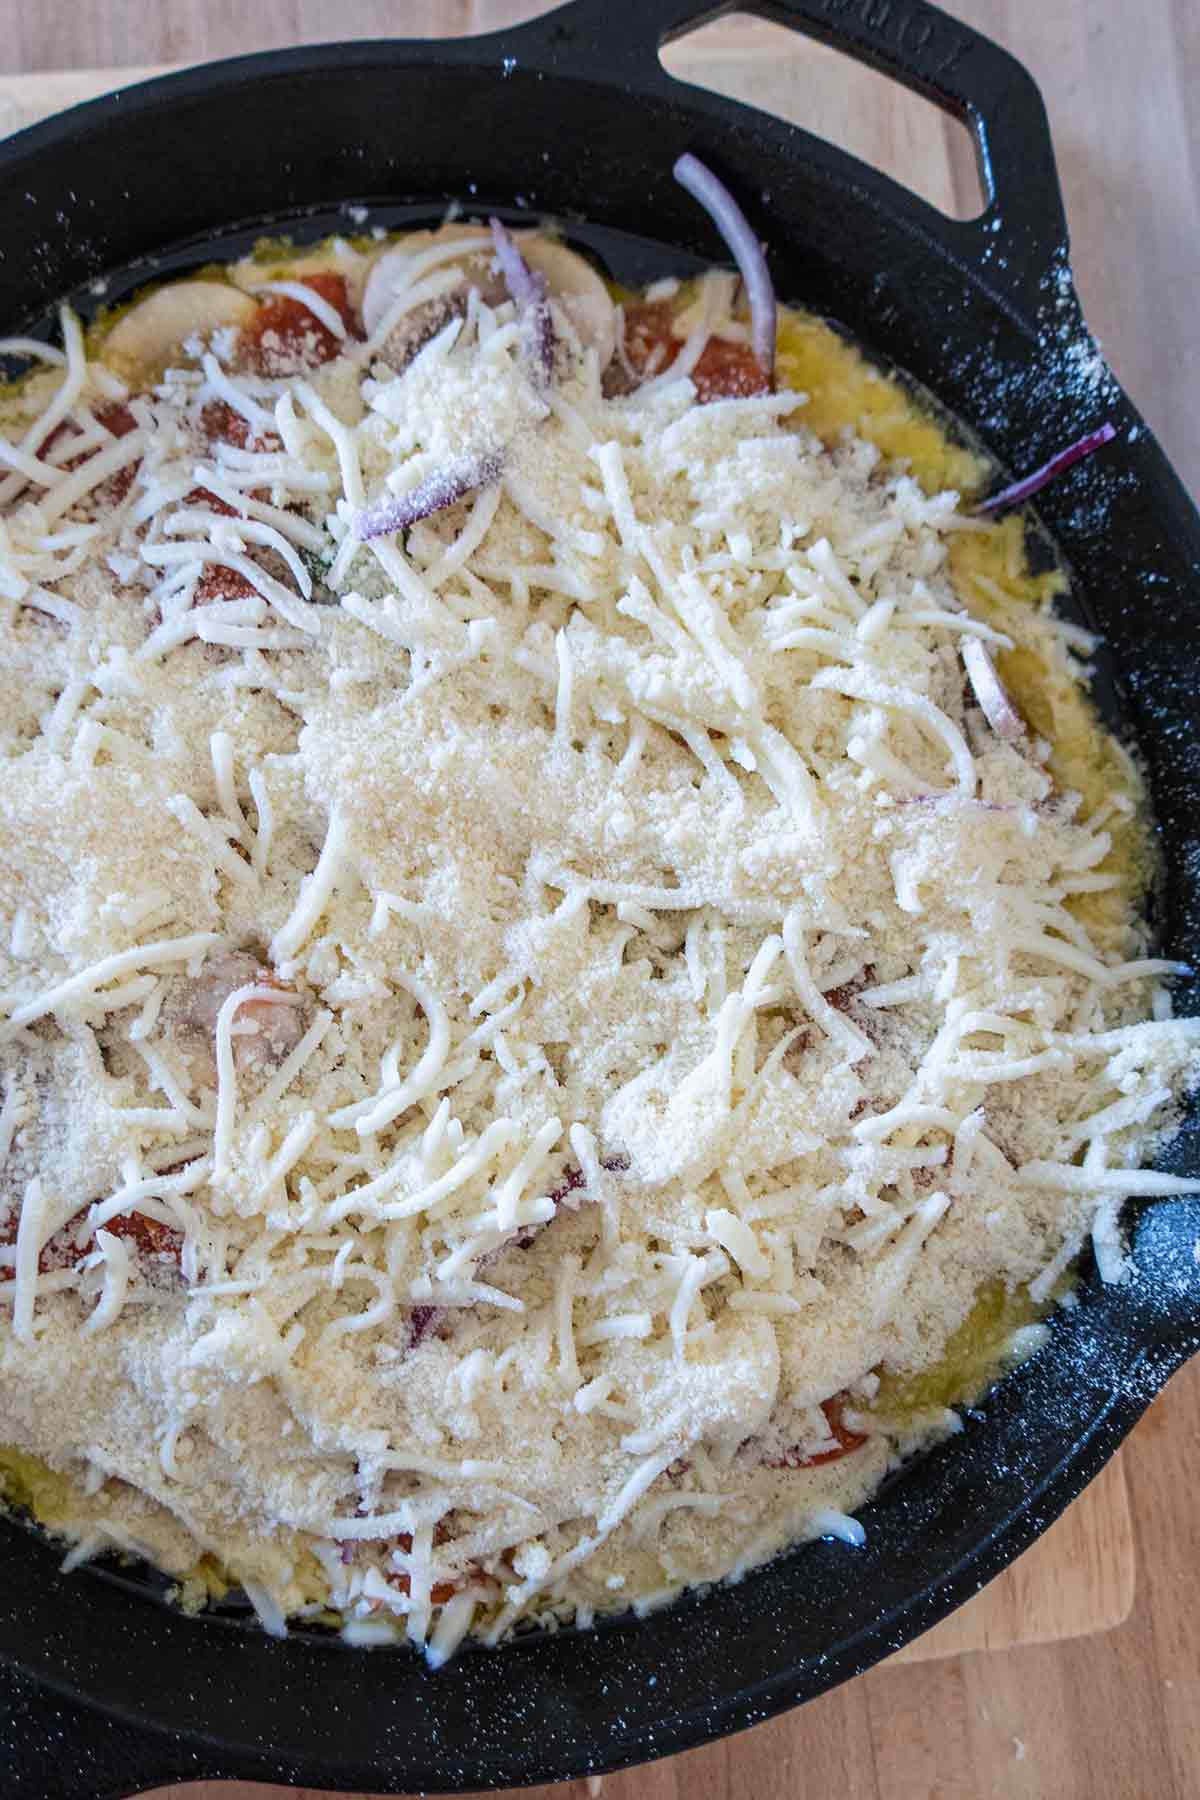 unbaked pizza pie in a skillet